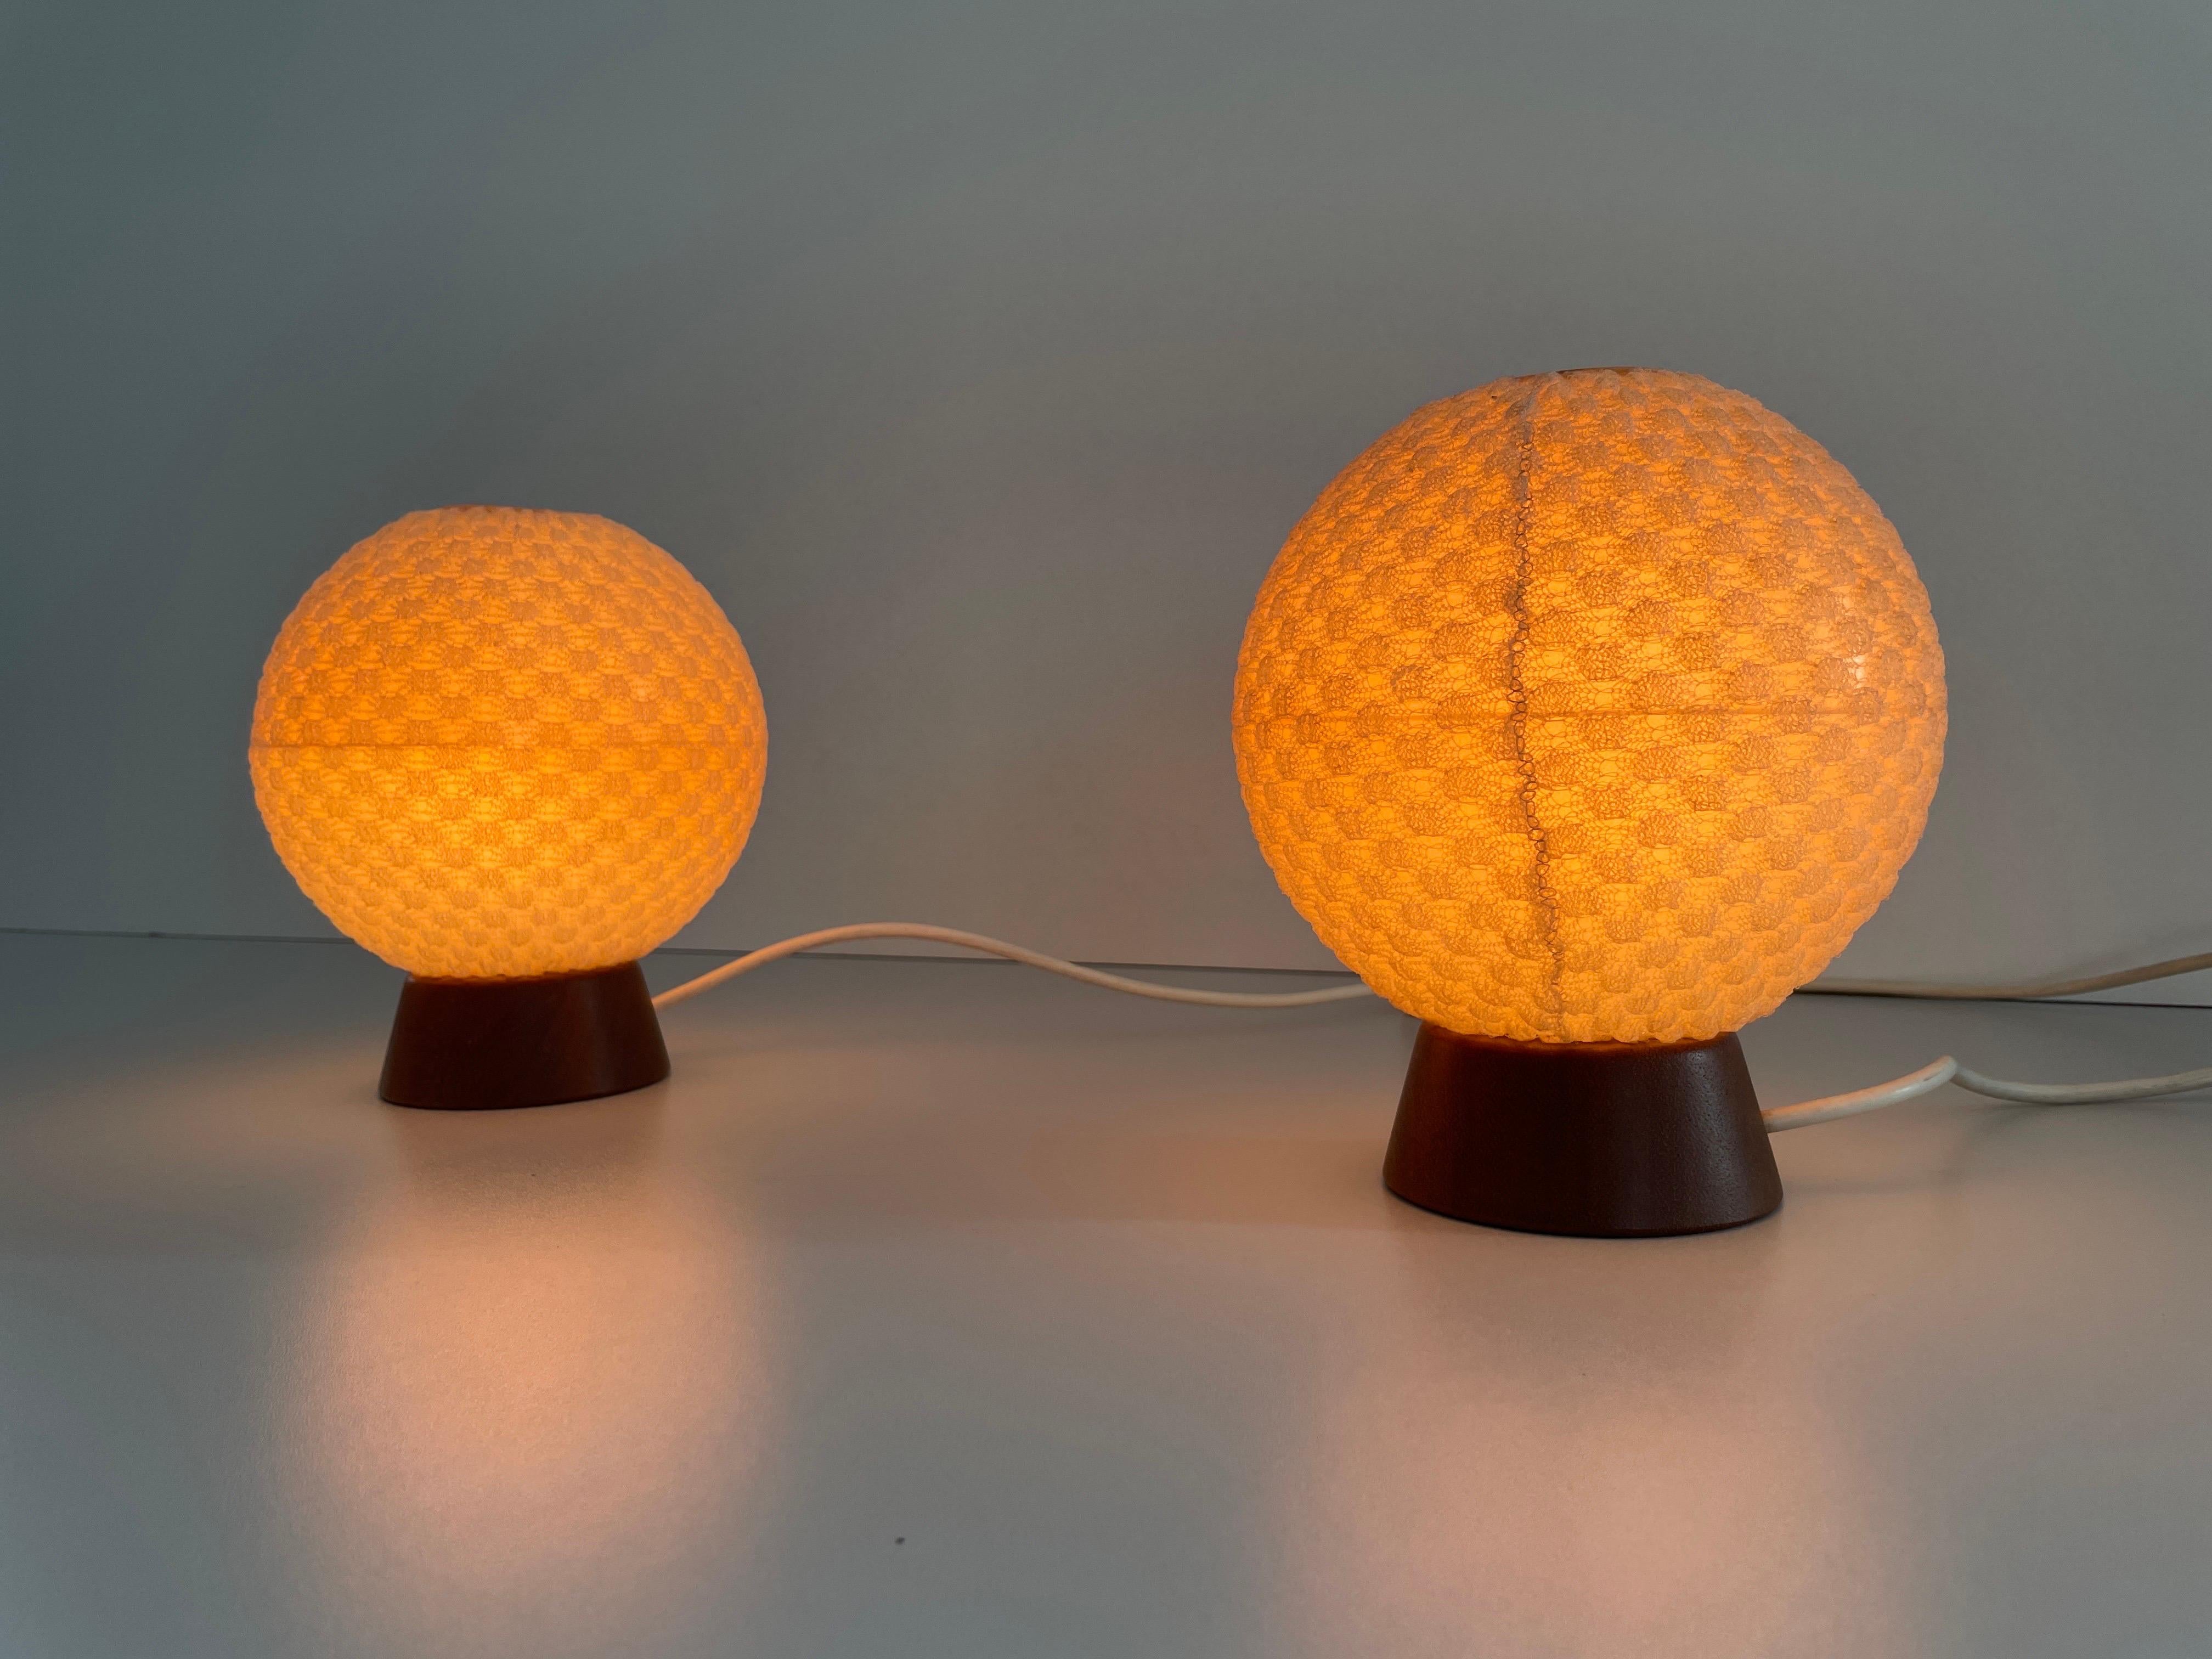 Teak & Ball Fabric Shade Pair of Bedside Lamps by Temde, 1960s Germany For Sale 4